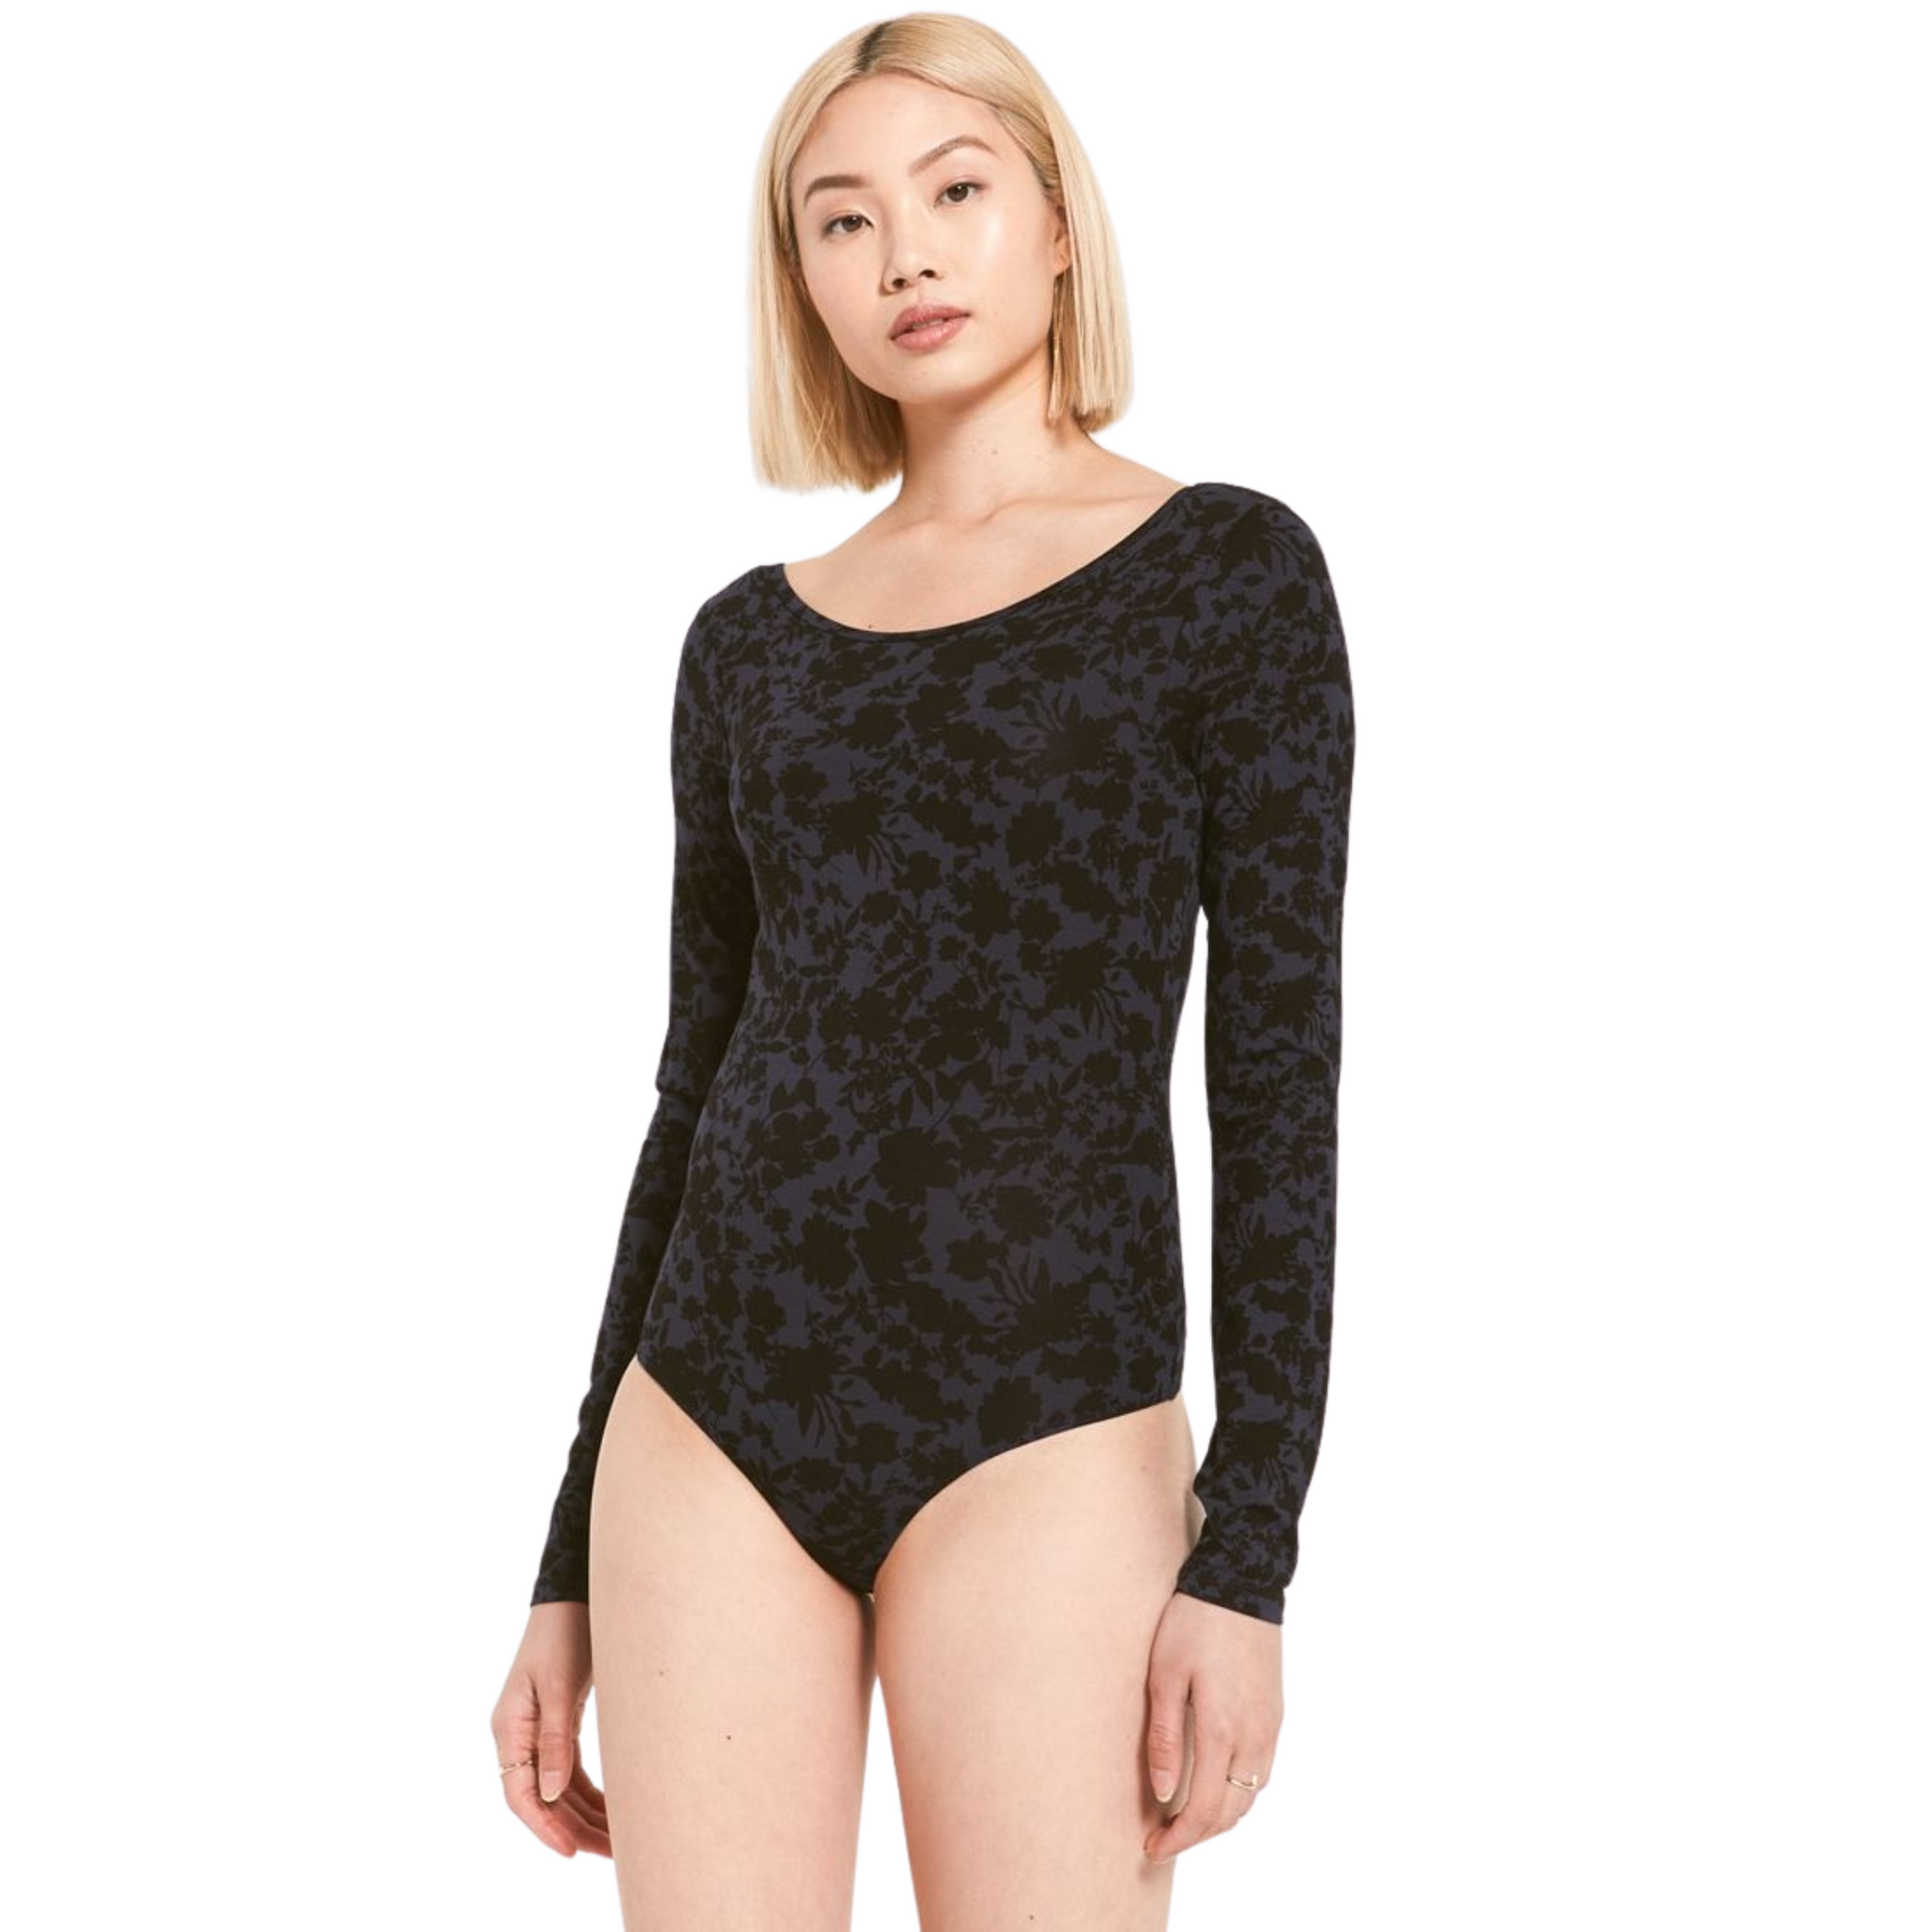 This Tilda Floral Bodysuit is the perfect evening outfit. It is crafted with a sleek black color and a form-fitting design to accentuate curves. The long-sleeve style provides an additional layer of warmth and elegance.